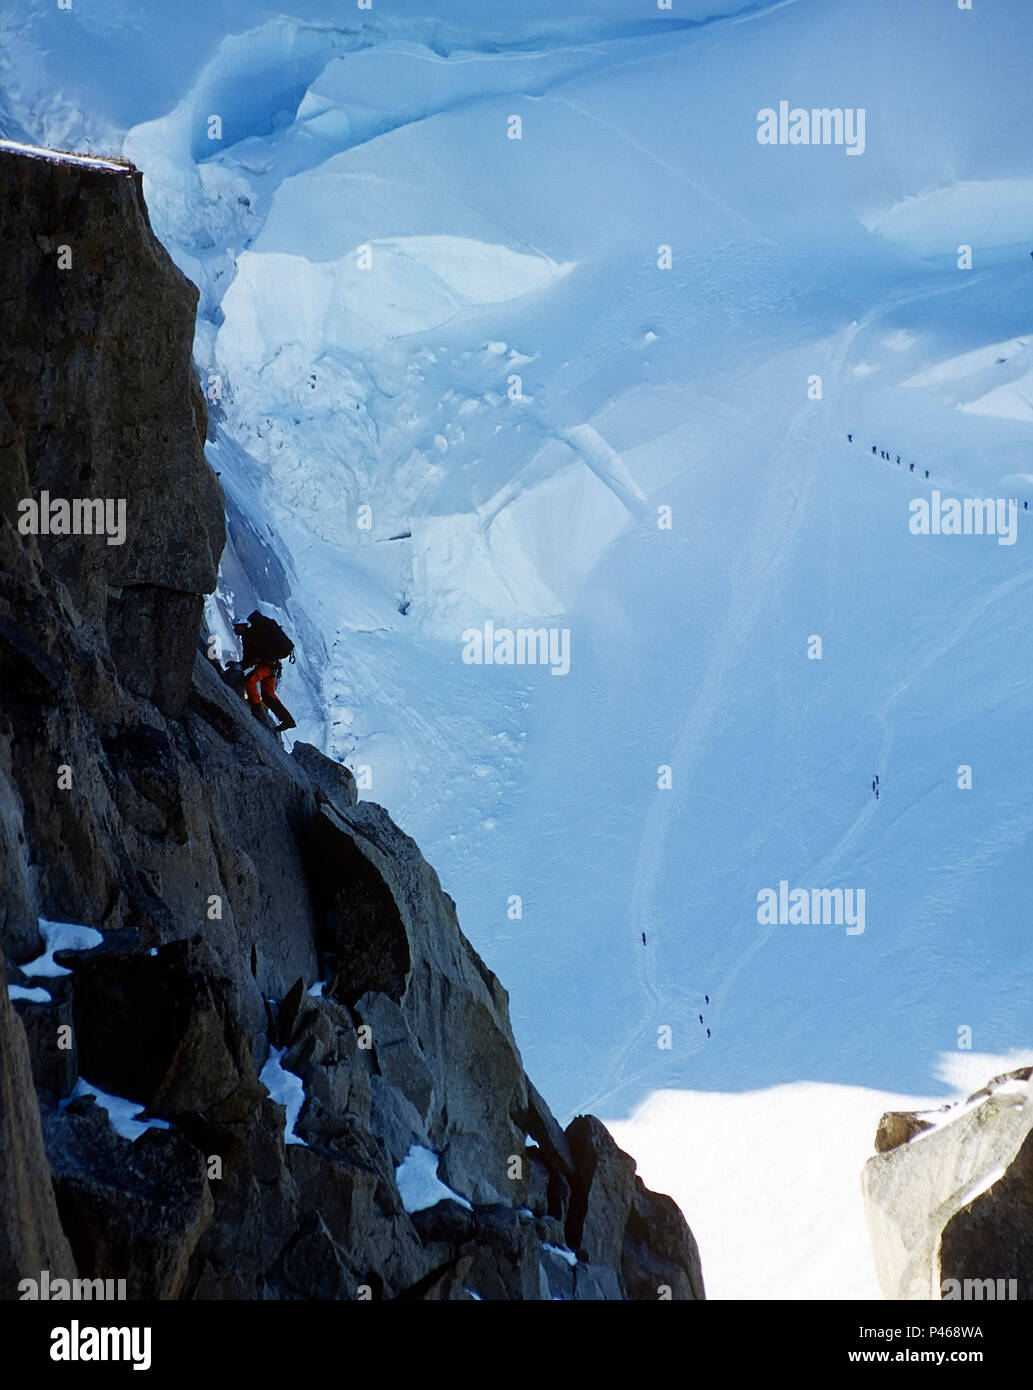 Climbers on the Cosmiques Arête of the Aiguille du Midi in the French Alps, Chamonix Stock Photo